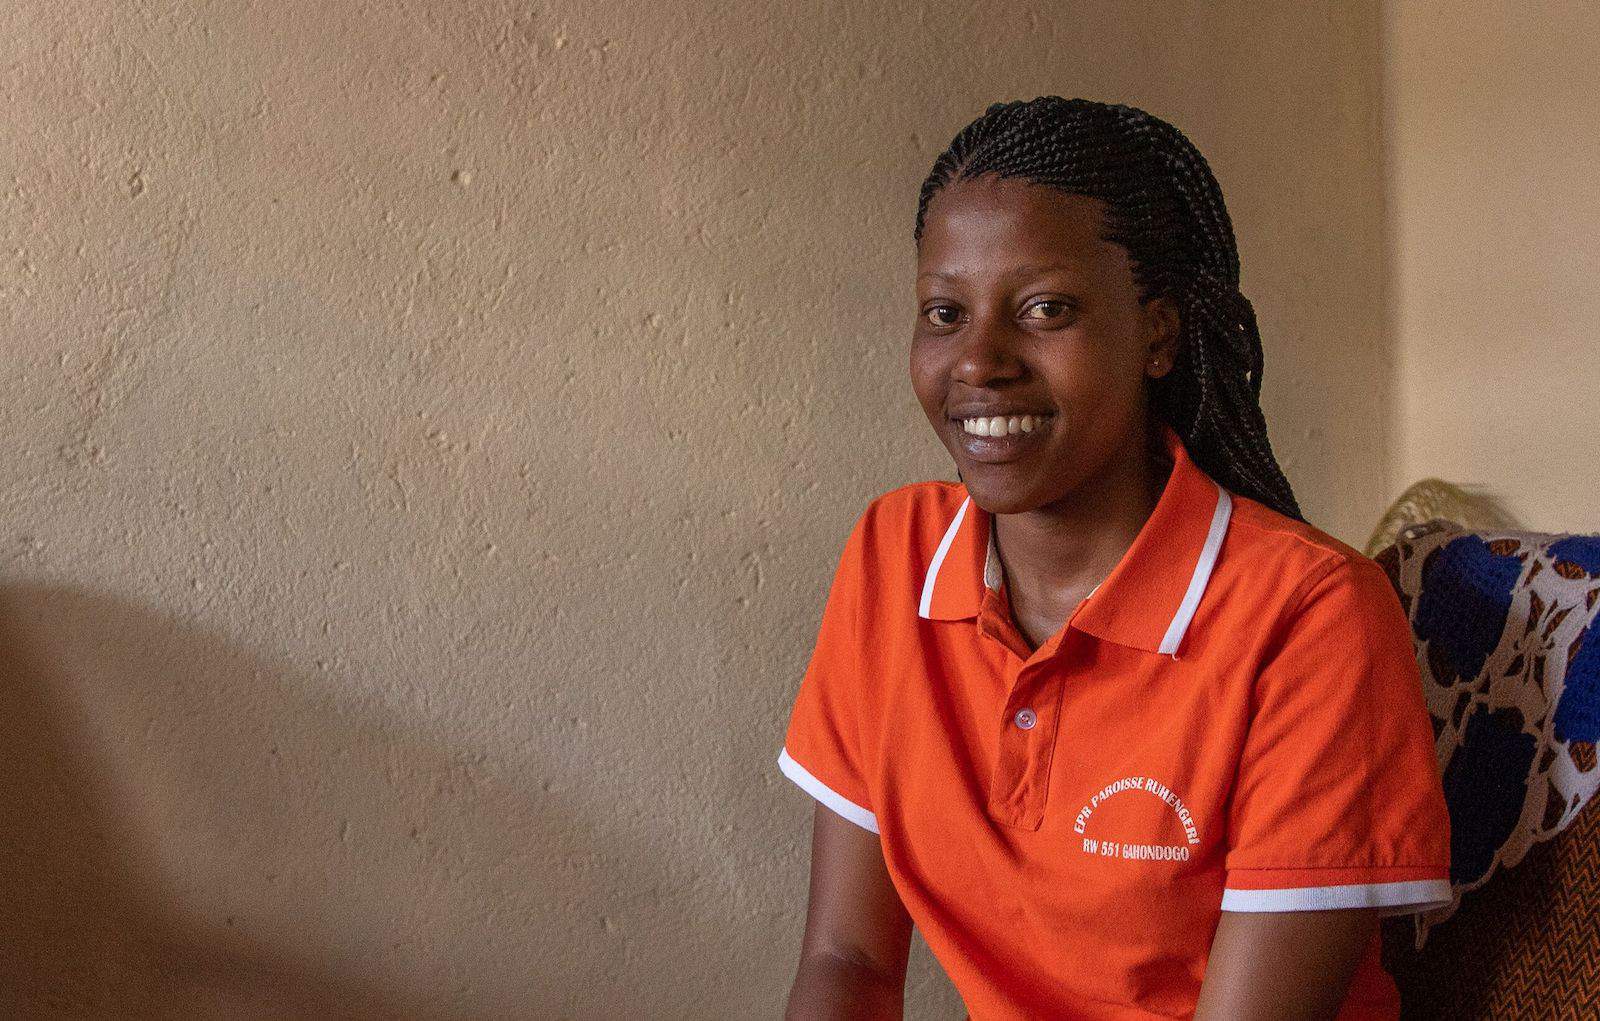 A young woman in an orange shirt smiles.